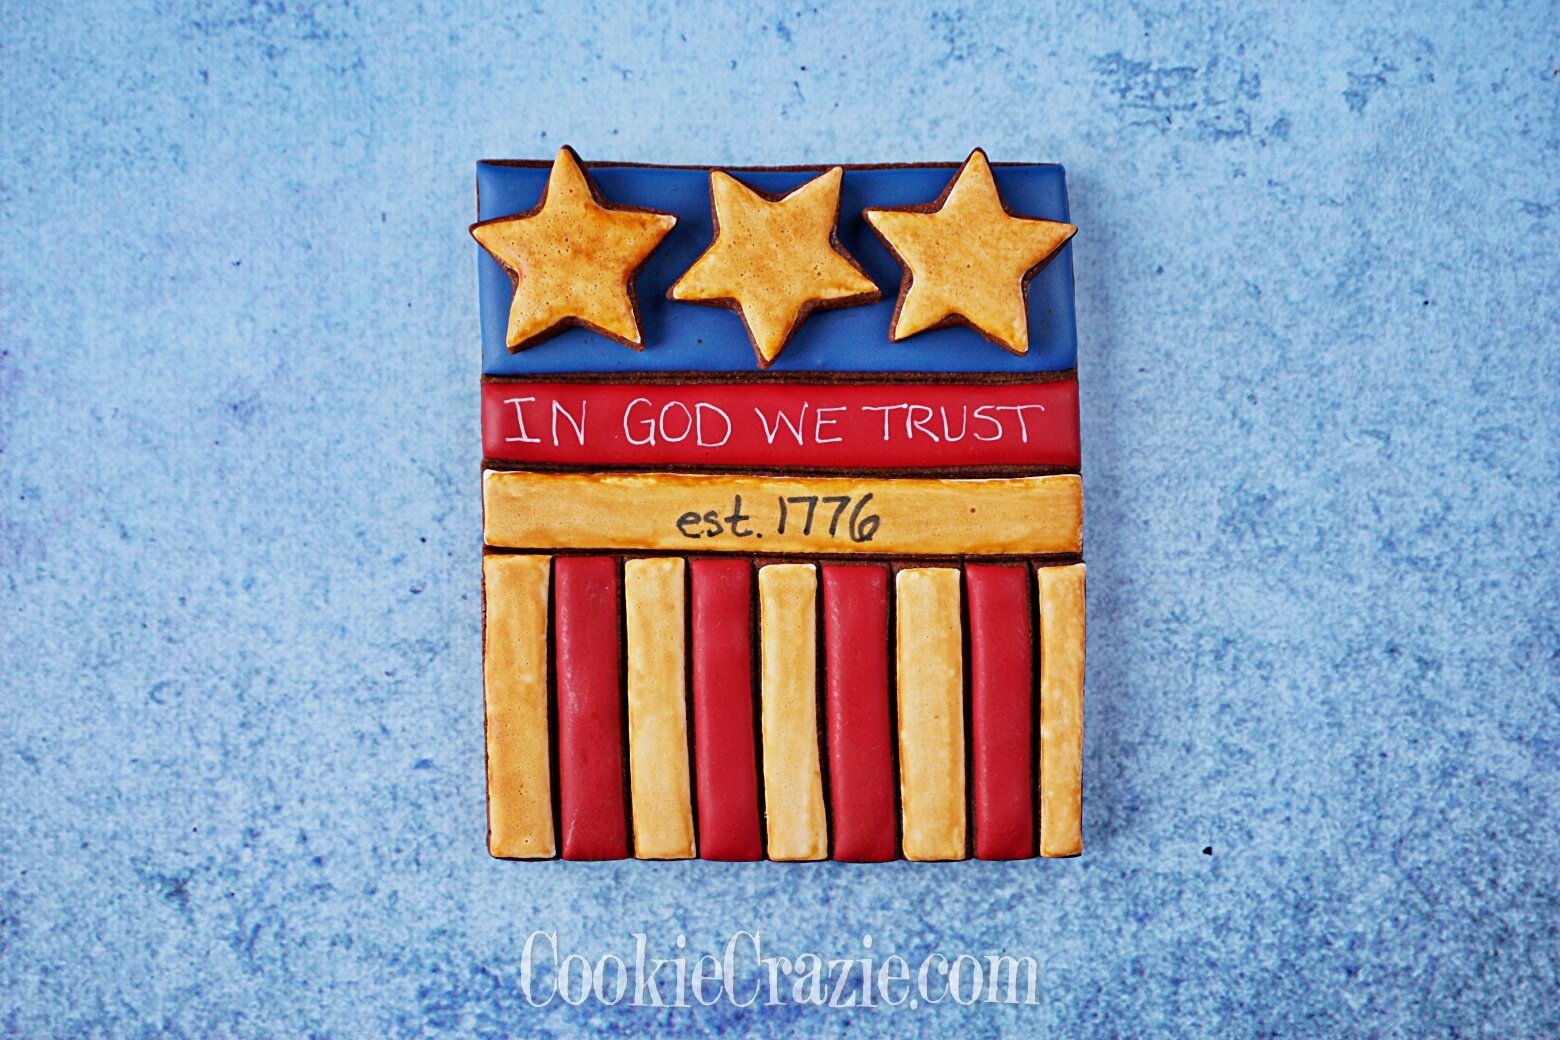  Stars ‘N Stripes USA Plaque Decorated Sugar Cookie YouTube video  HERE  